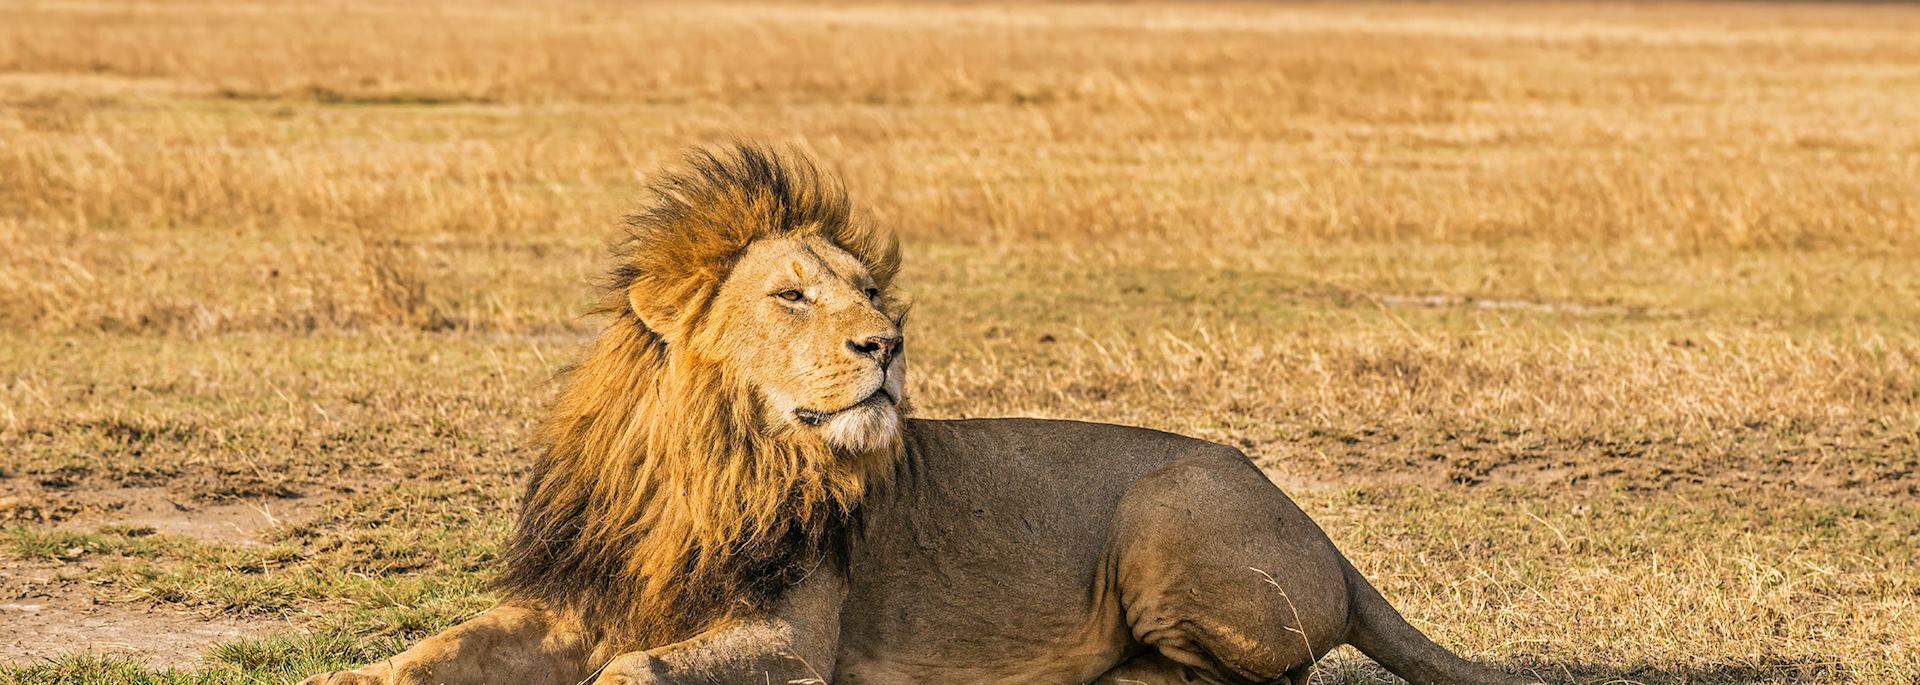 Lion resting in the Ngorongoro Crater